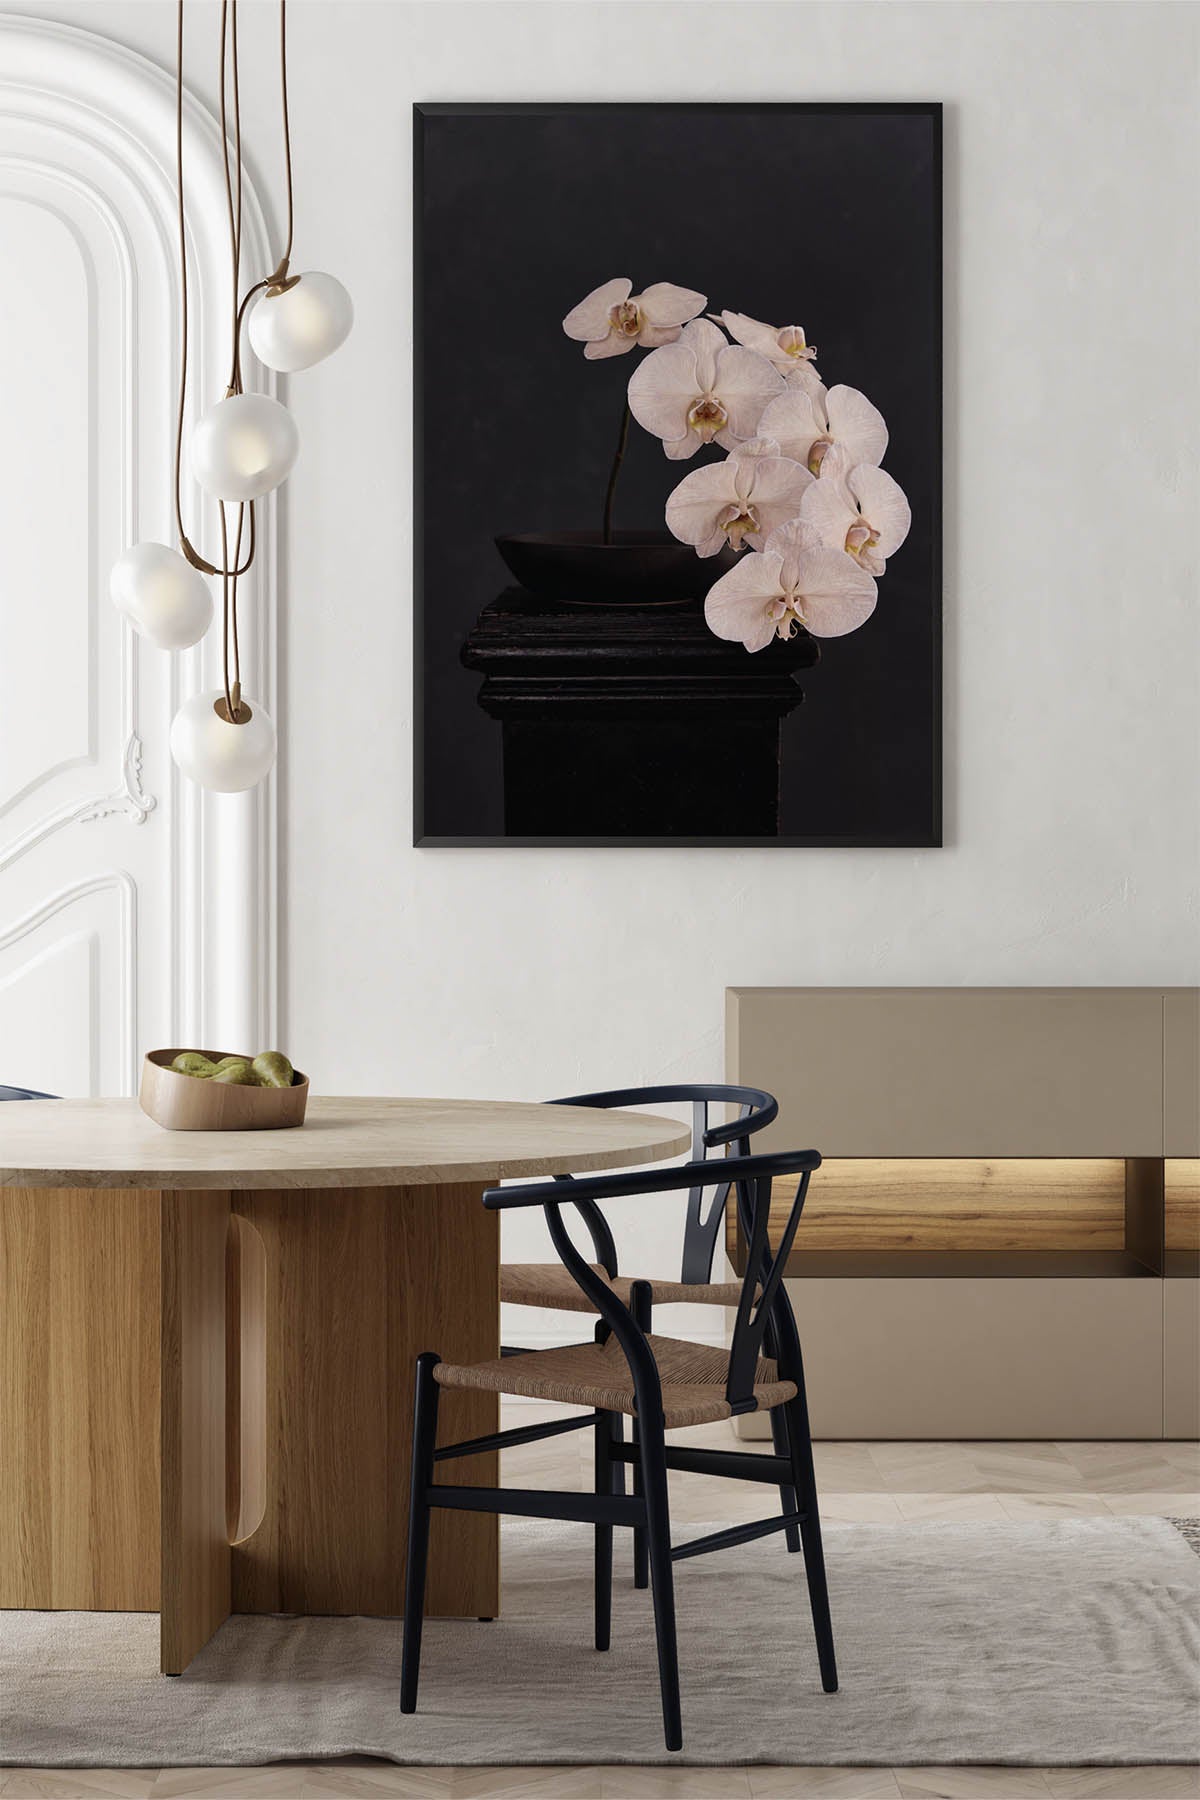 Fine Art Print Of A White Phaleanopsis Stem In A Black Bowl On A Black Mantle With A Black Rustic Background